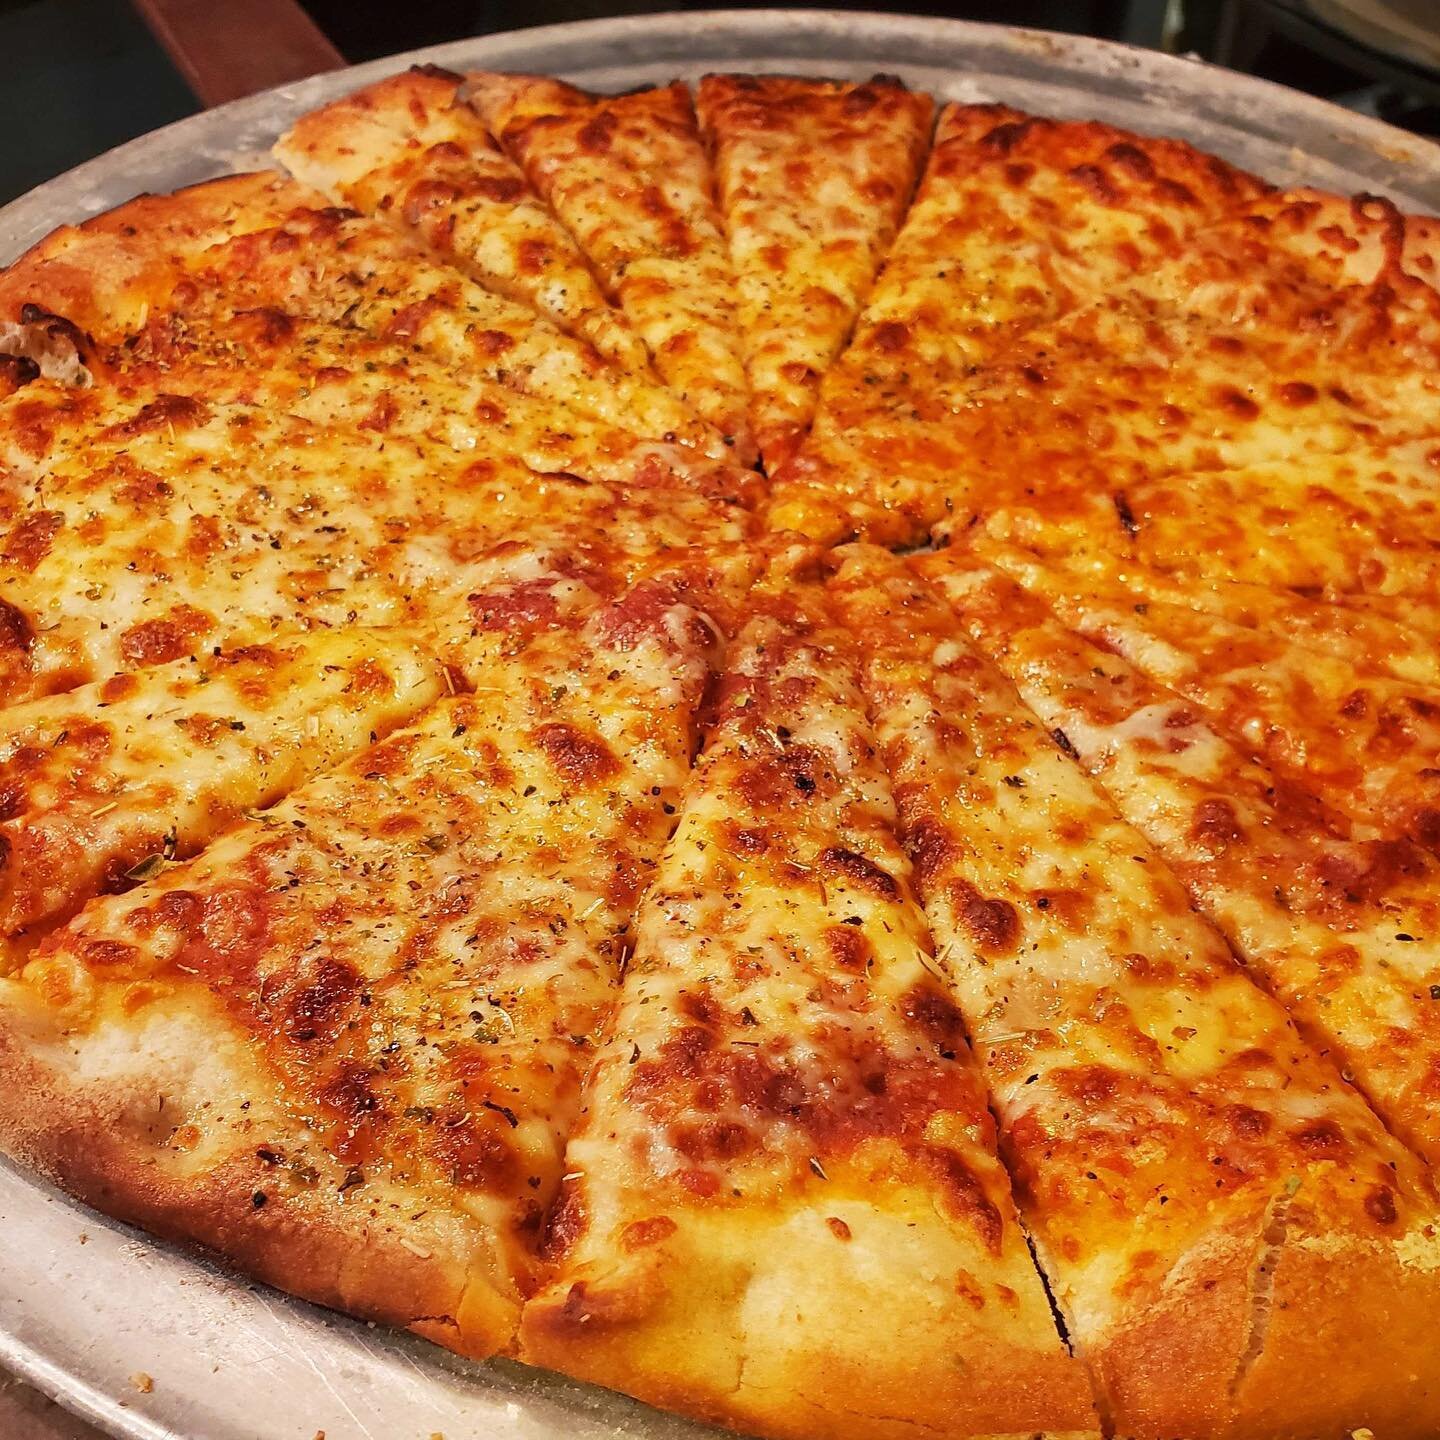 A simple cheese pizza cooked to perfection is one of life&rsquo;s great joys! 🤤
.
.
.
.
.
.
.
#pizza #pasta #cheesepizza #cinzettis #ayce #allyoucaneat #buffet #brunch #allyoucaneatbuffet #italianfood #italian #italianfeast #mangia #overlandpark #kc